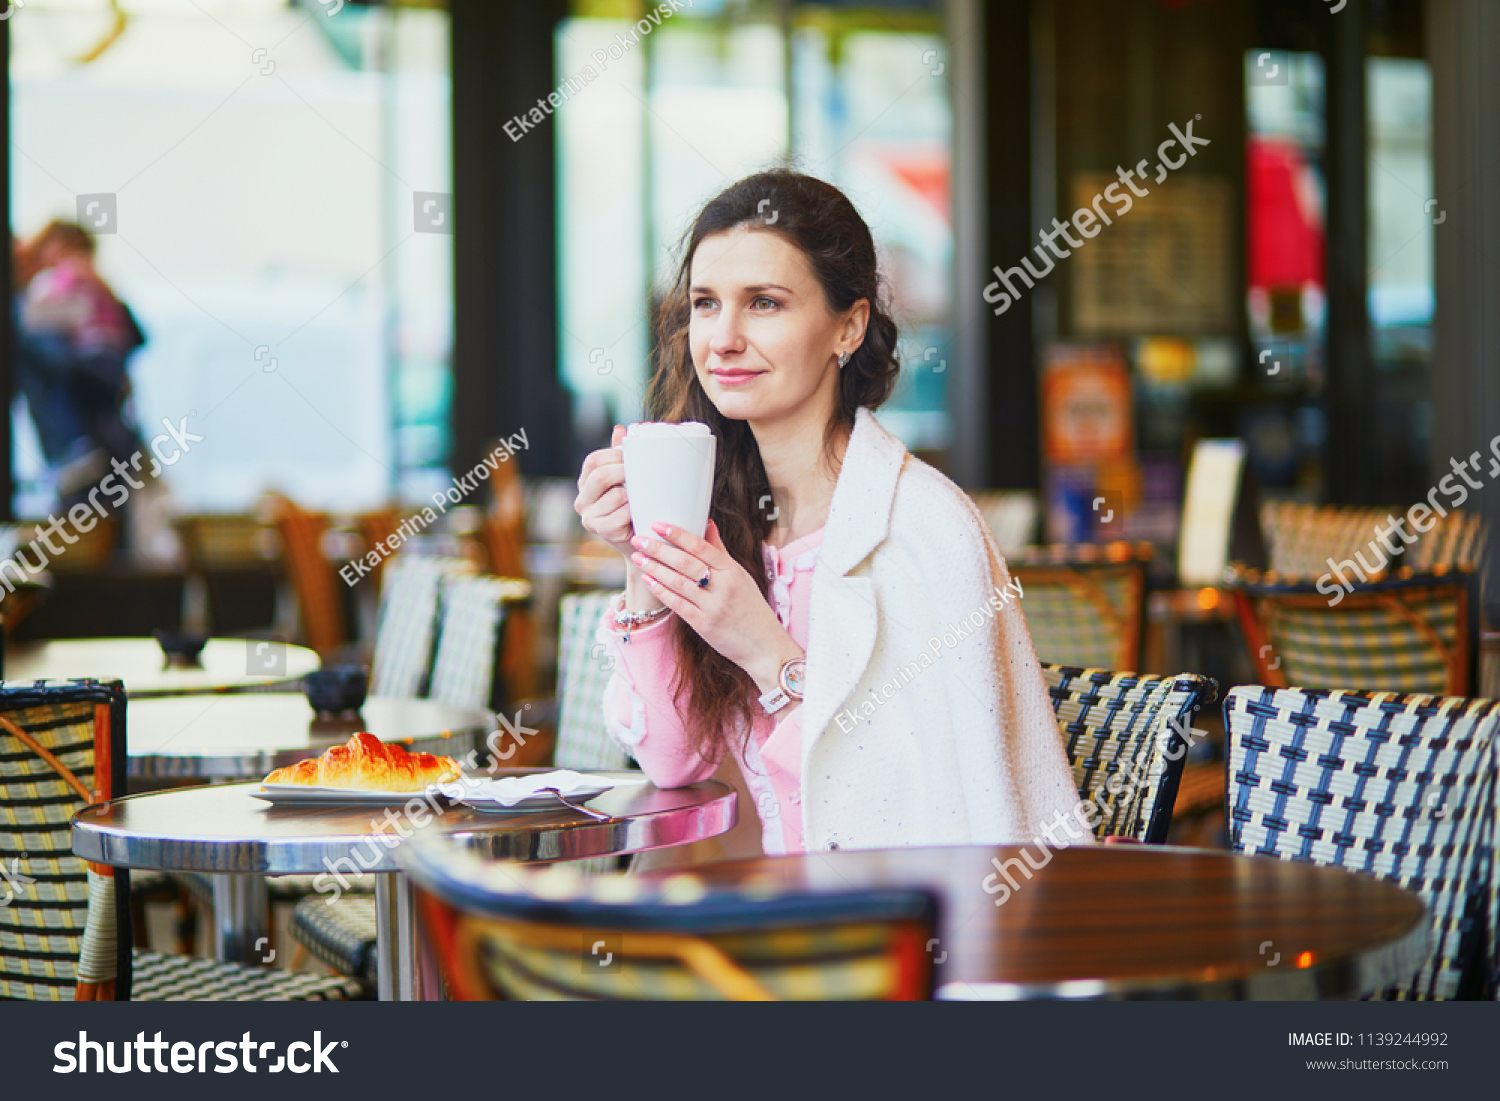 Beautiful young woman drinking coffee in outdoor cafe or restaurant, Paris, France #1139244992